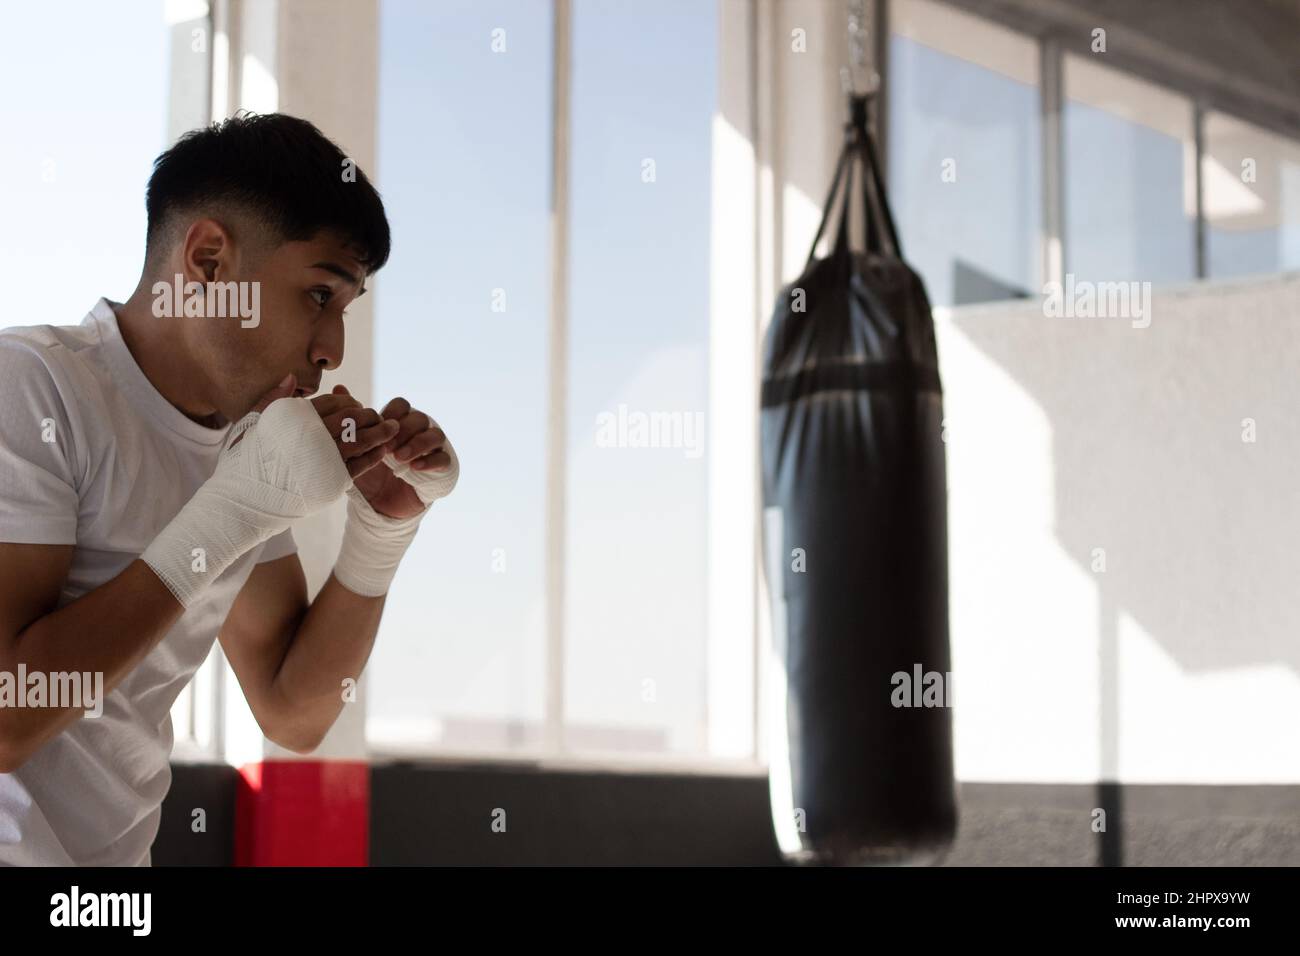 young boxer wearing a white t-shirt shadow boxing with his fists bandaged during his training inside the boxing gym. Stock Photo